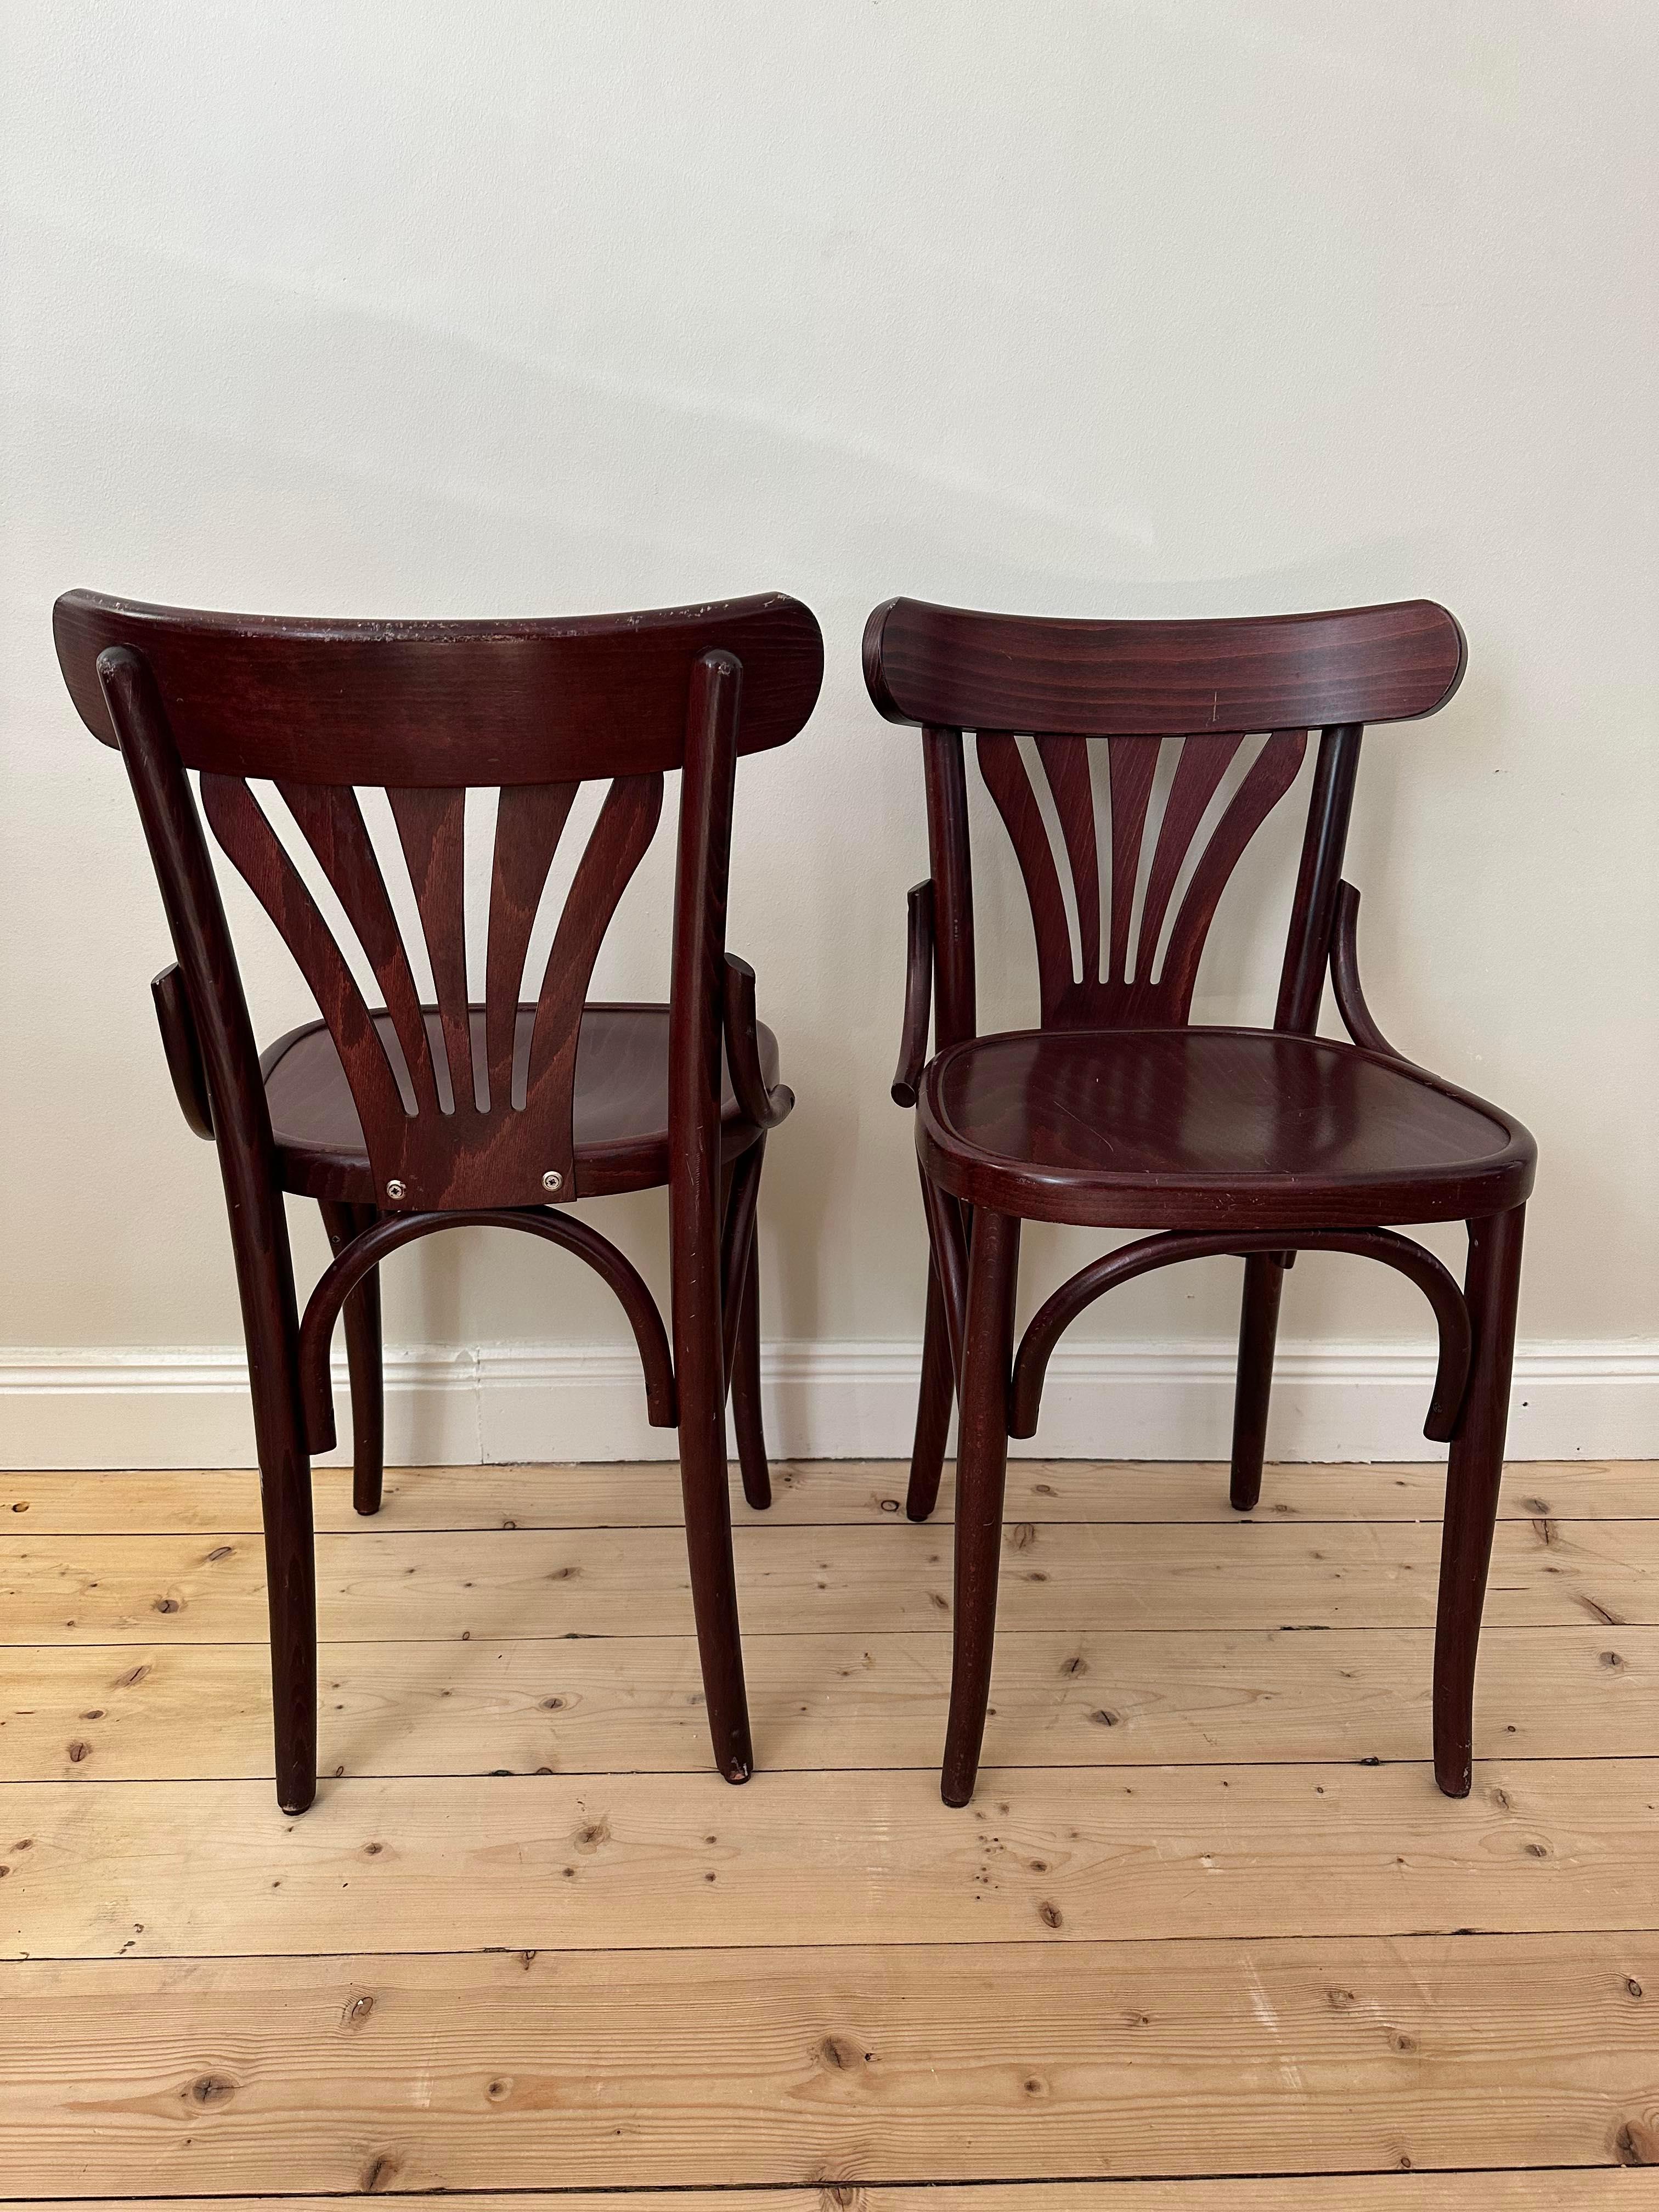 6 bistro chairs in dark red from a bistro restaurant in Paris. 
Very good condition. 
The chairs are sold in set of 6. 